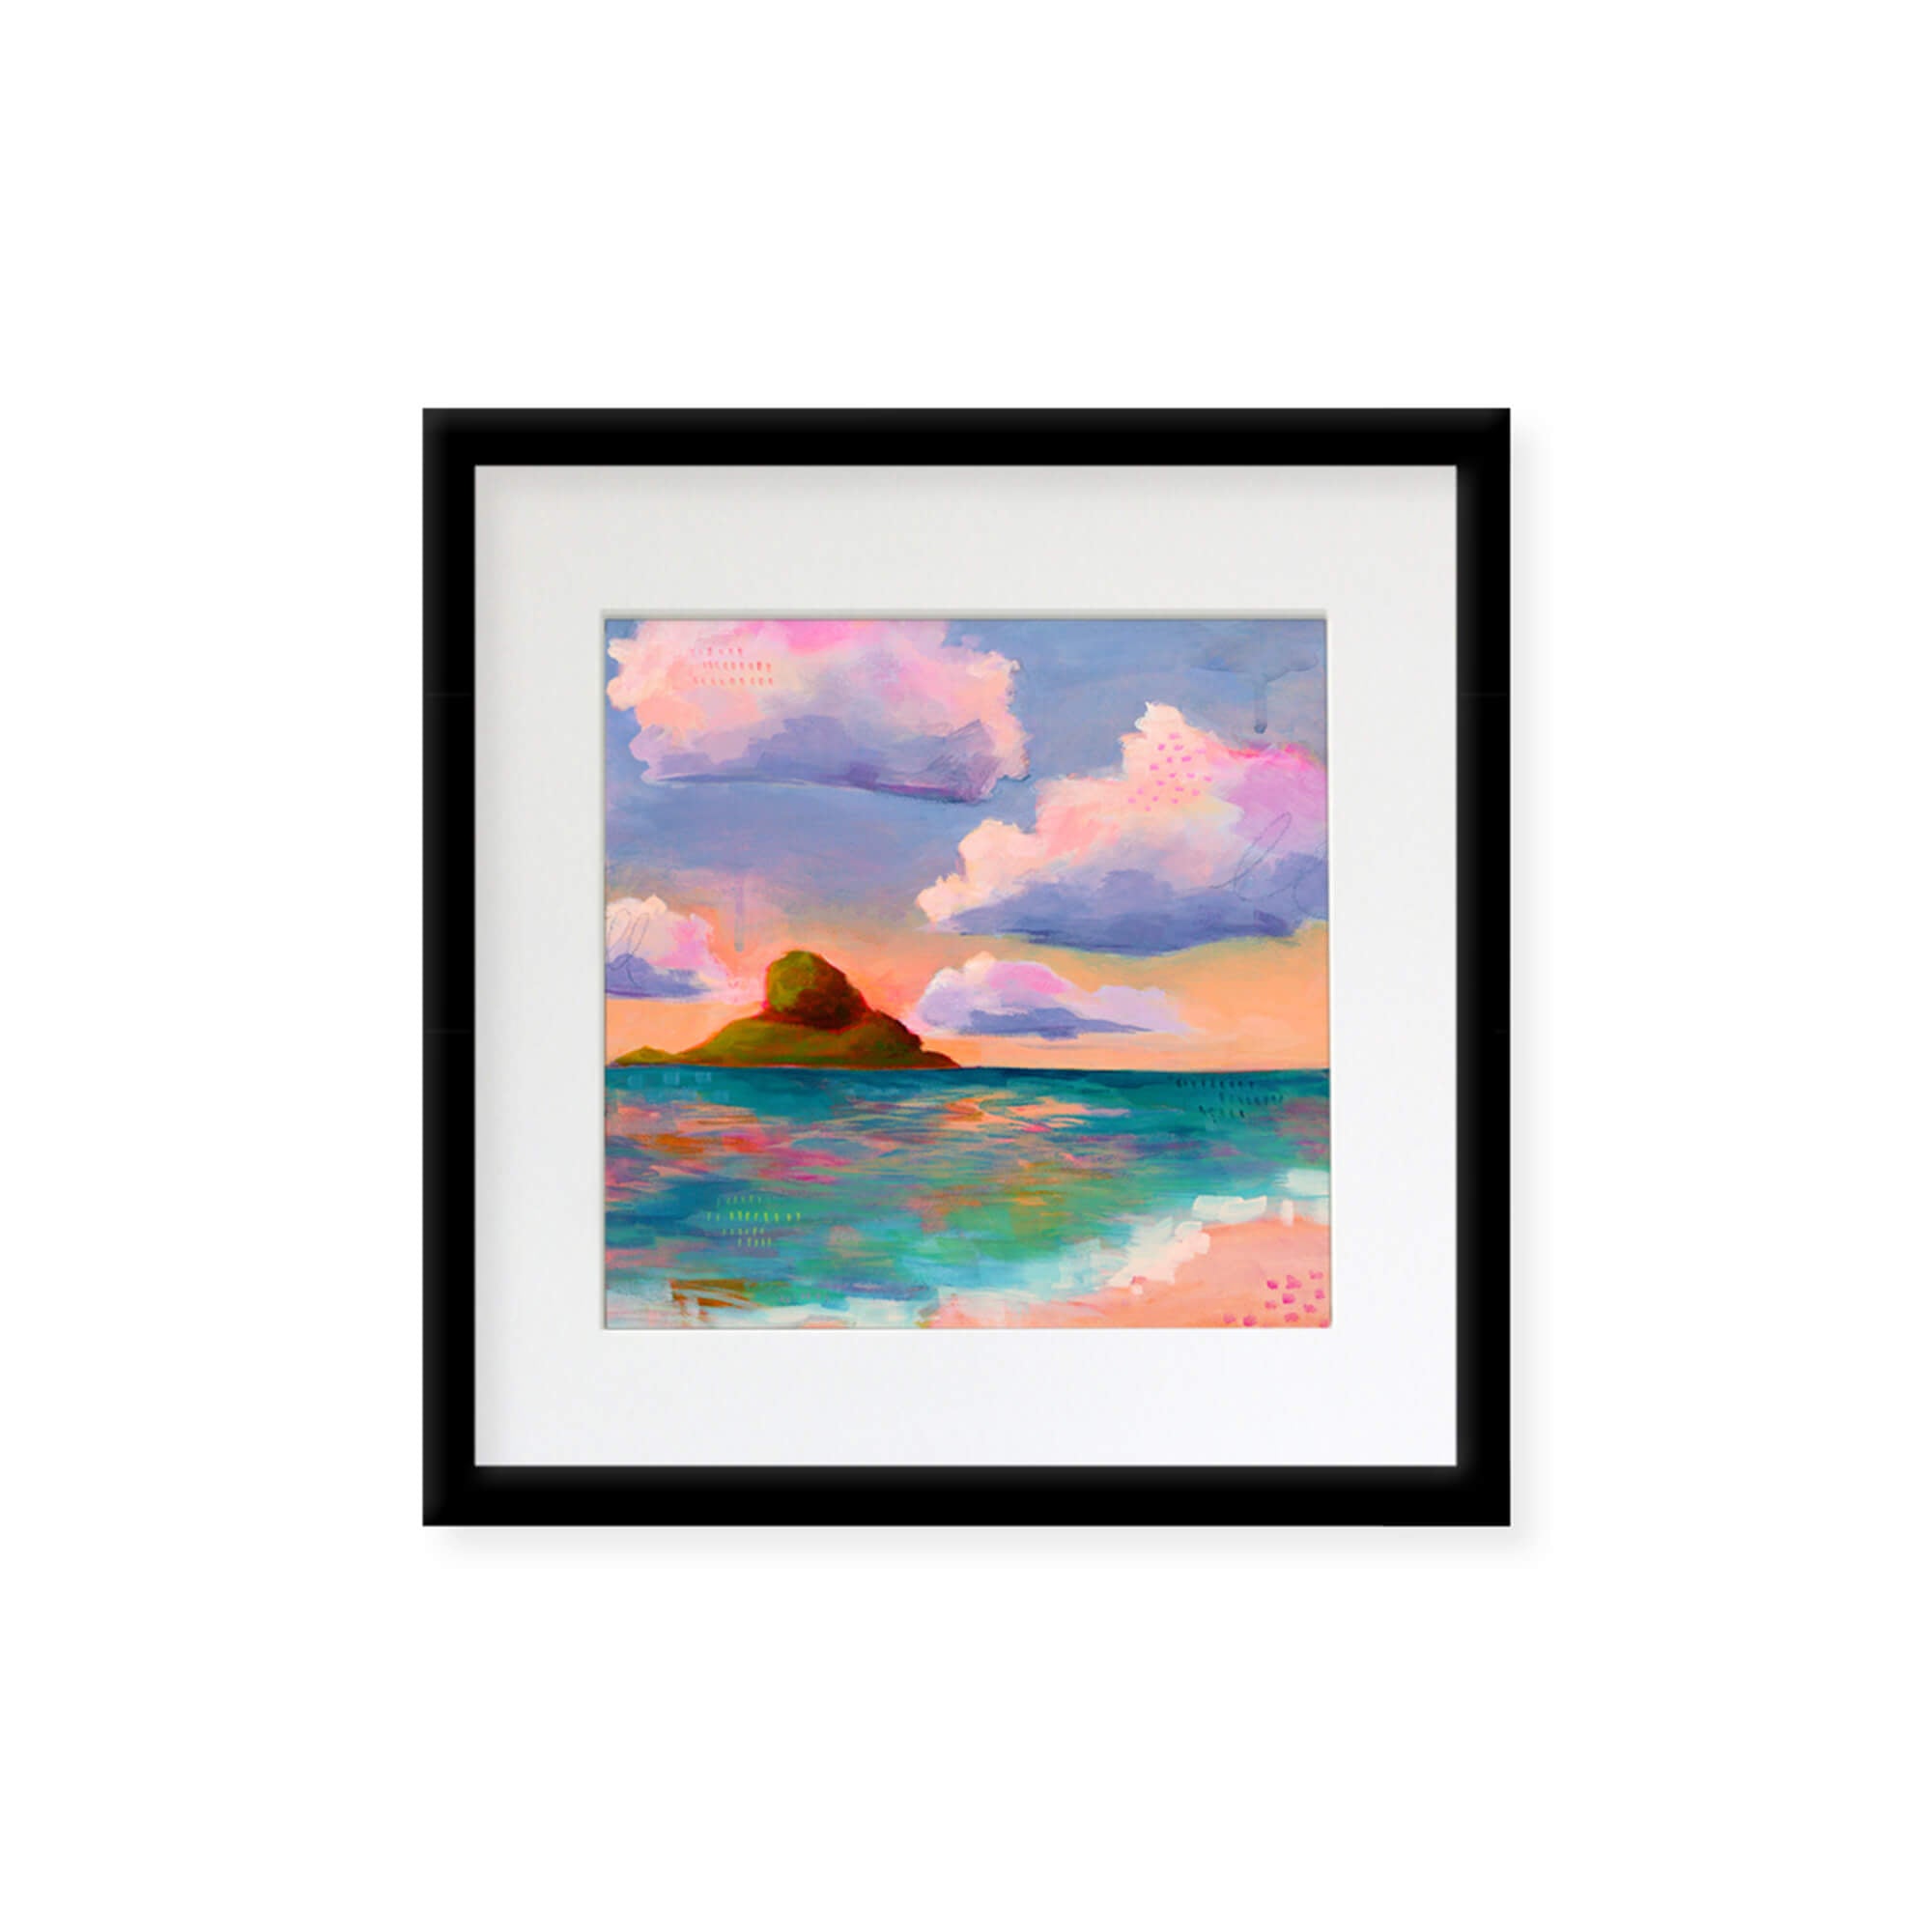 Multi colored seascape with a distant island by Hawaii artist Lindsay Wilkins